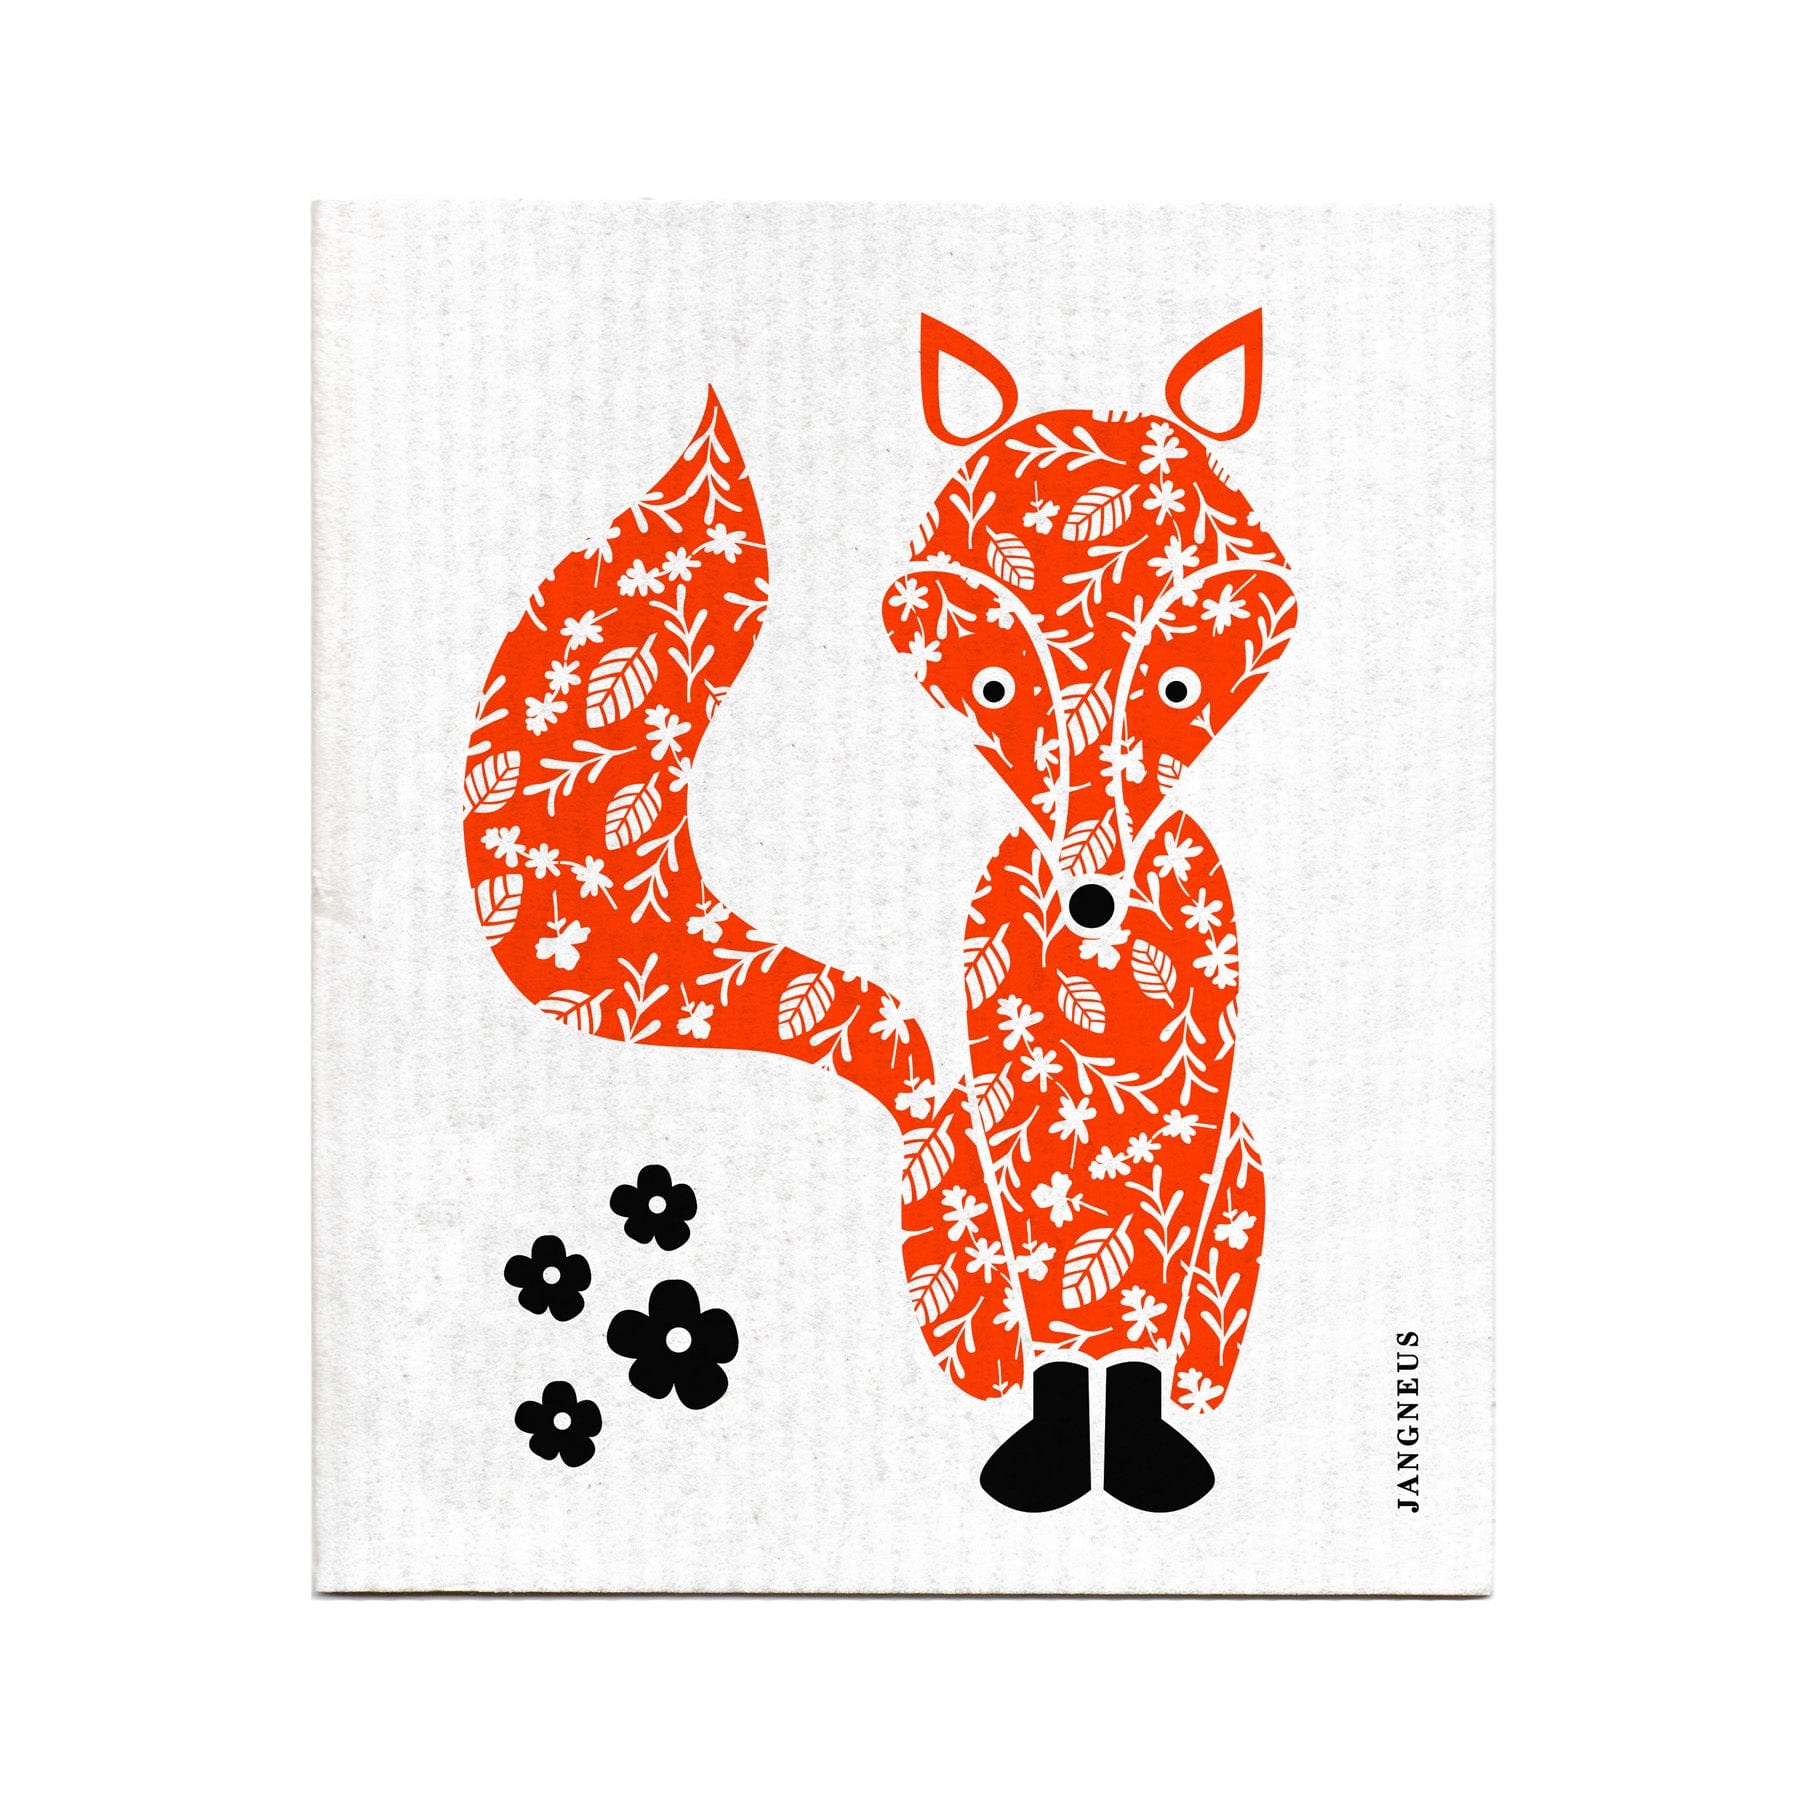 Illustrated orange fox with floral pattern standing against a textured white background, black paw prints nearby, modern graphic art design